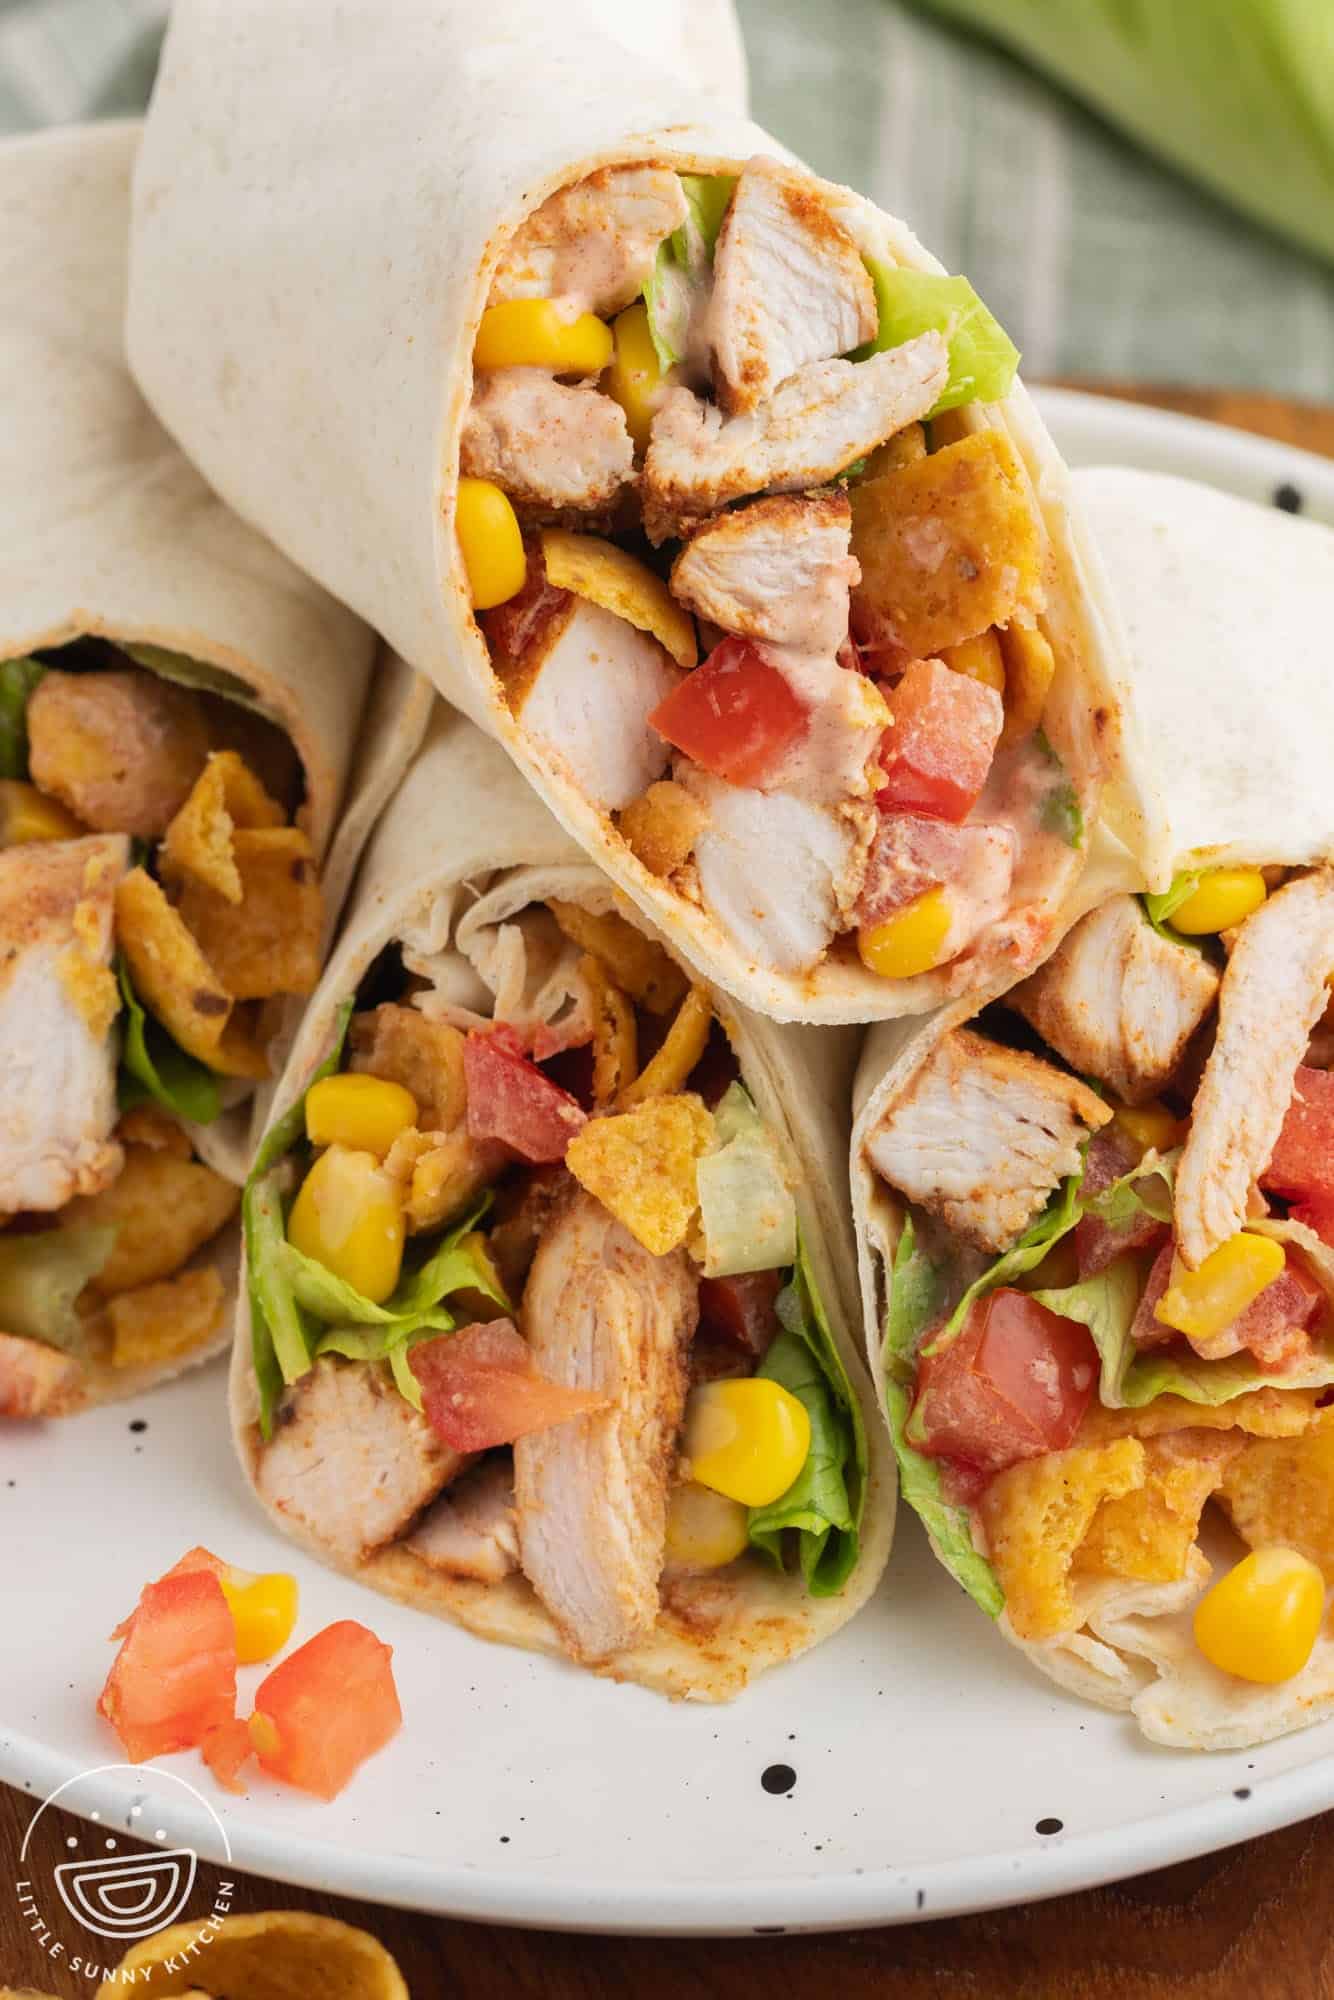 two chicken wraps, cut in half, on a plate. Inside of the wrap sandwiches is chicken, corn, tomatoes, lettuce, cheese, and fritos corn chips.